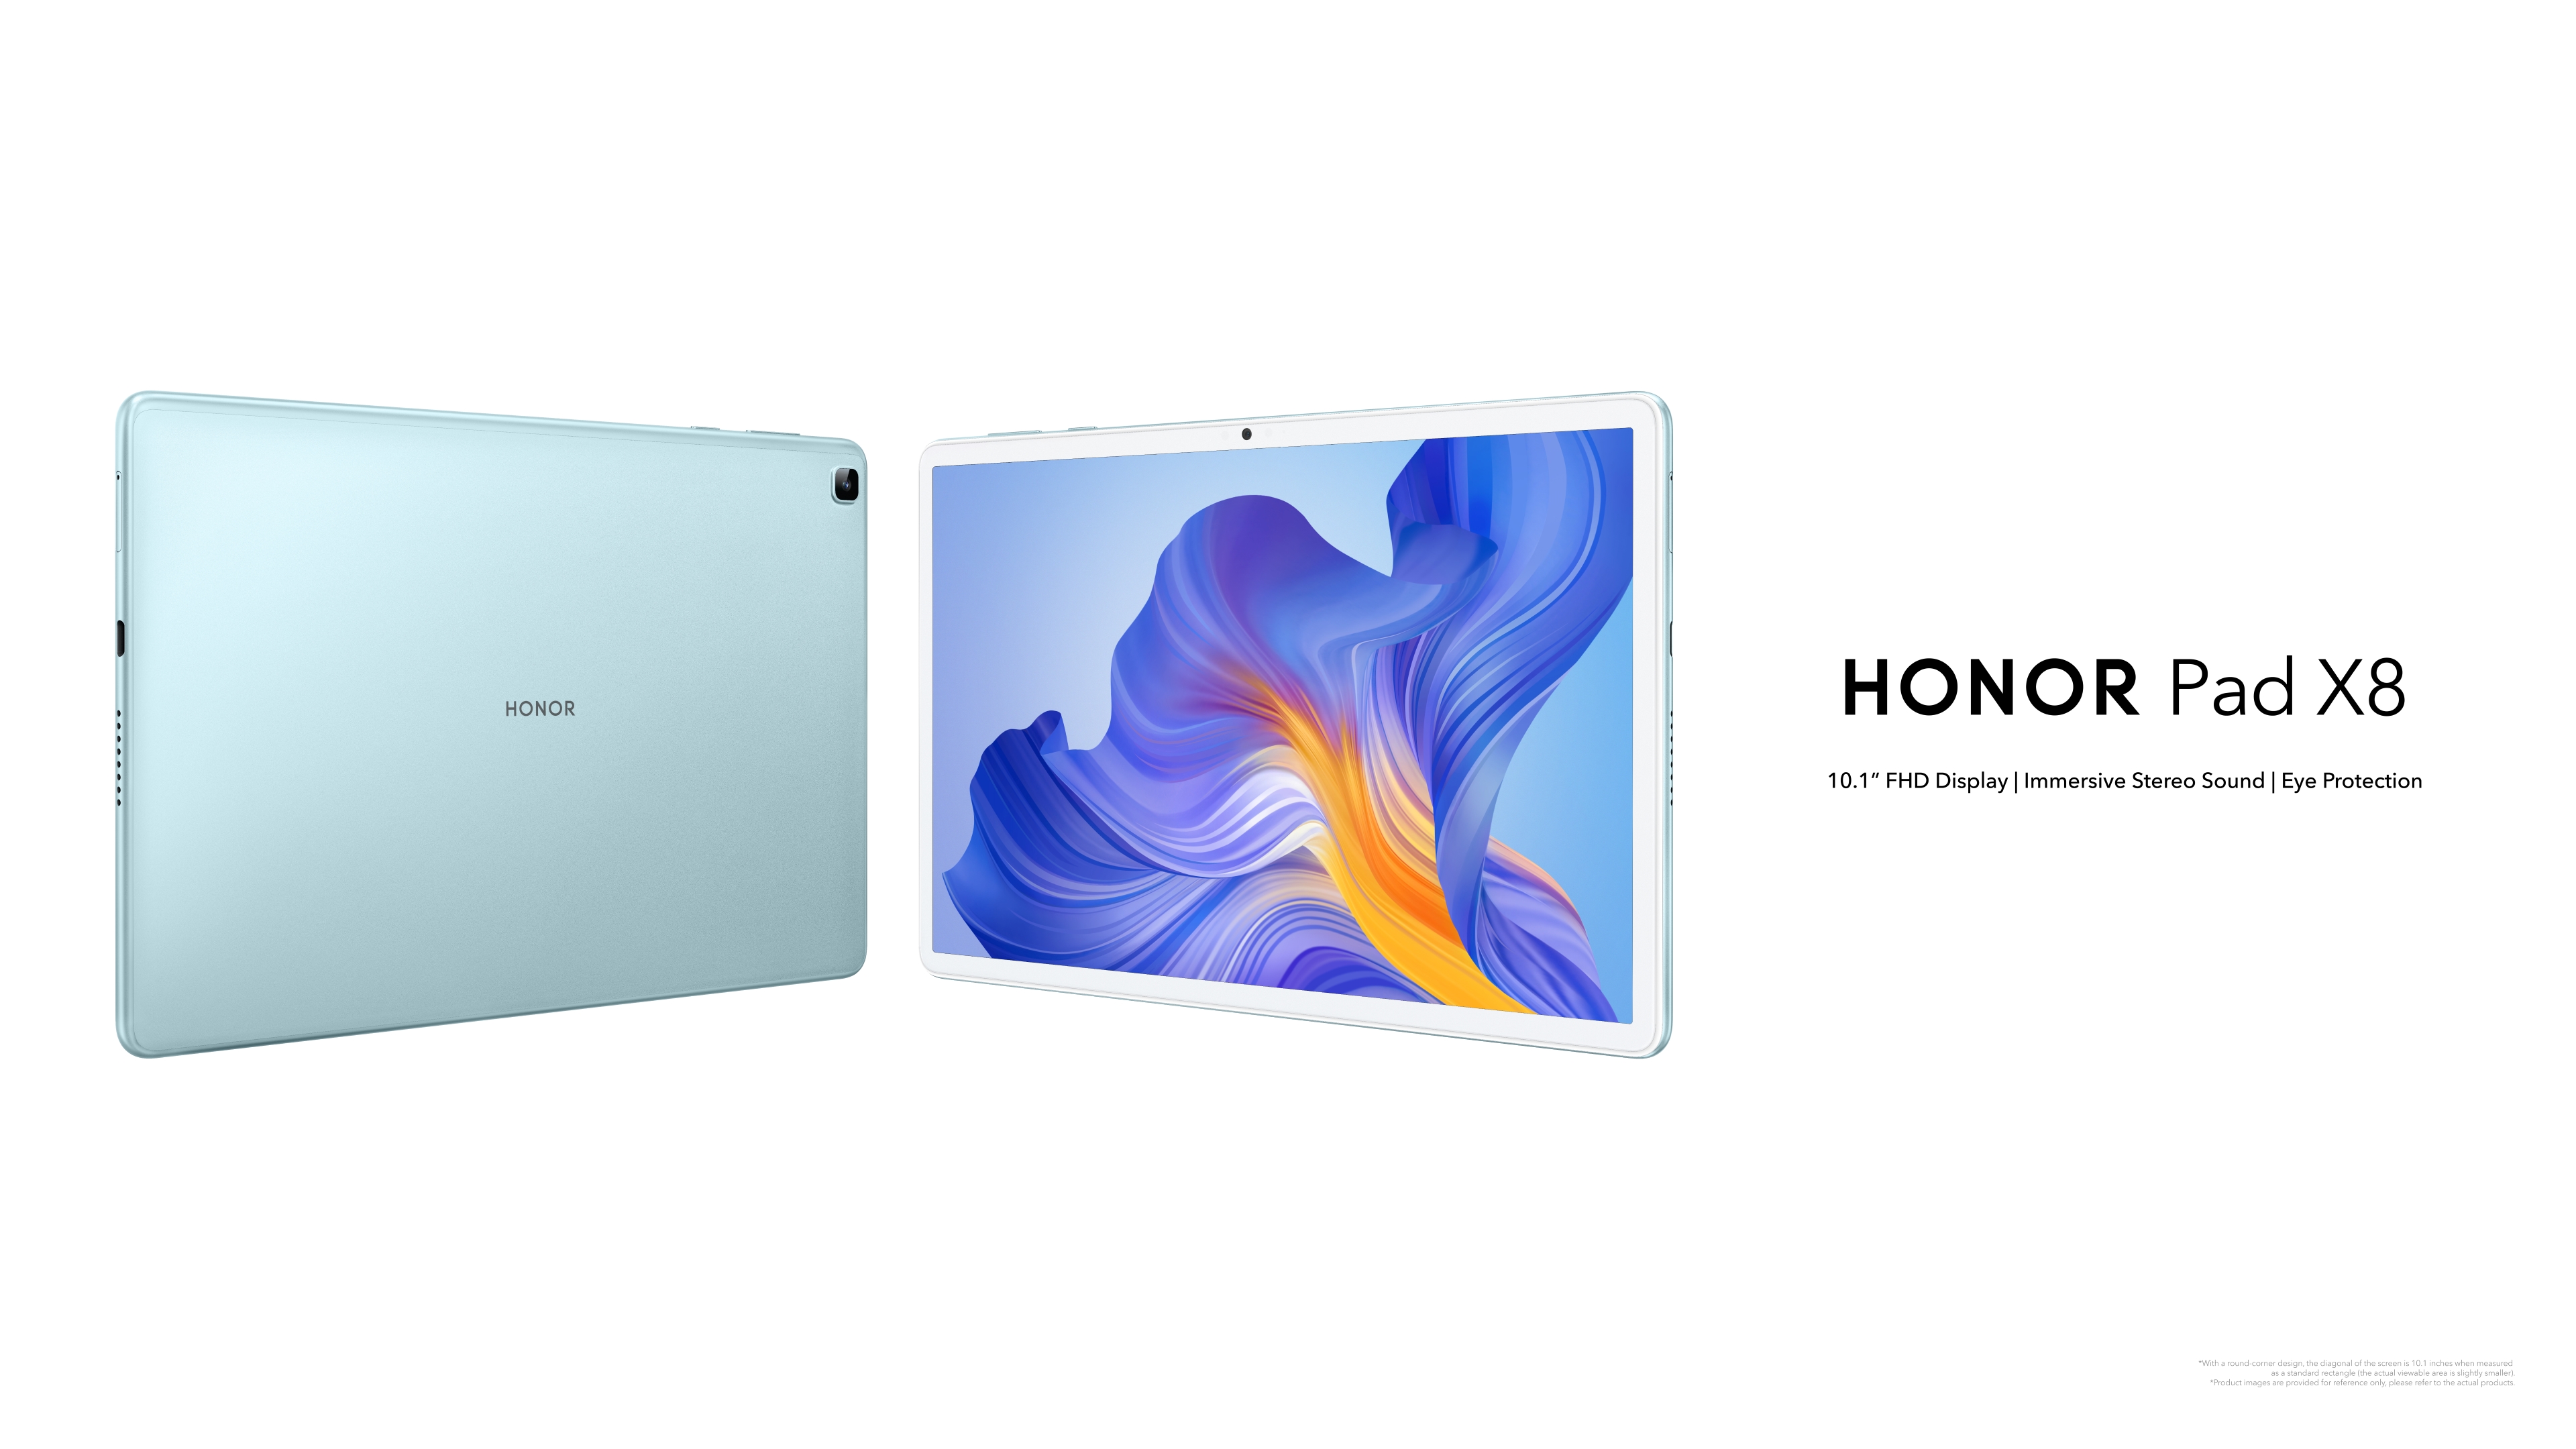 HONOR Pad X8 - Introduction, Features, Performance - HONOR UK